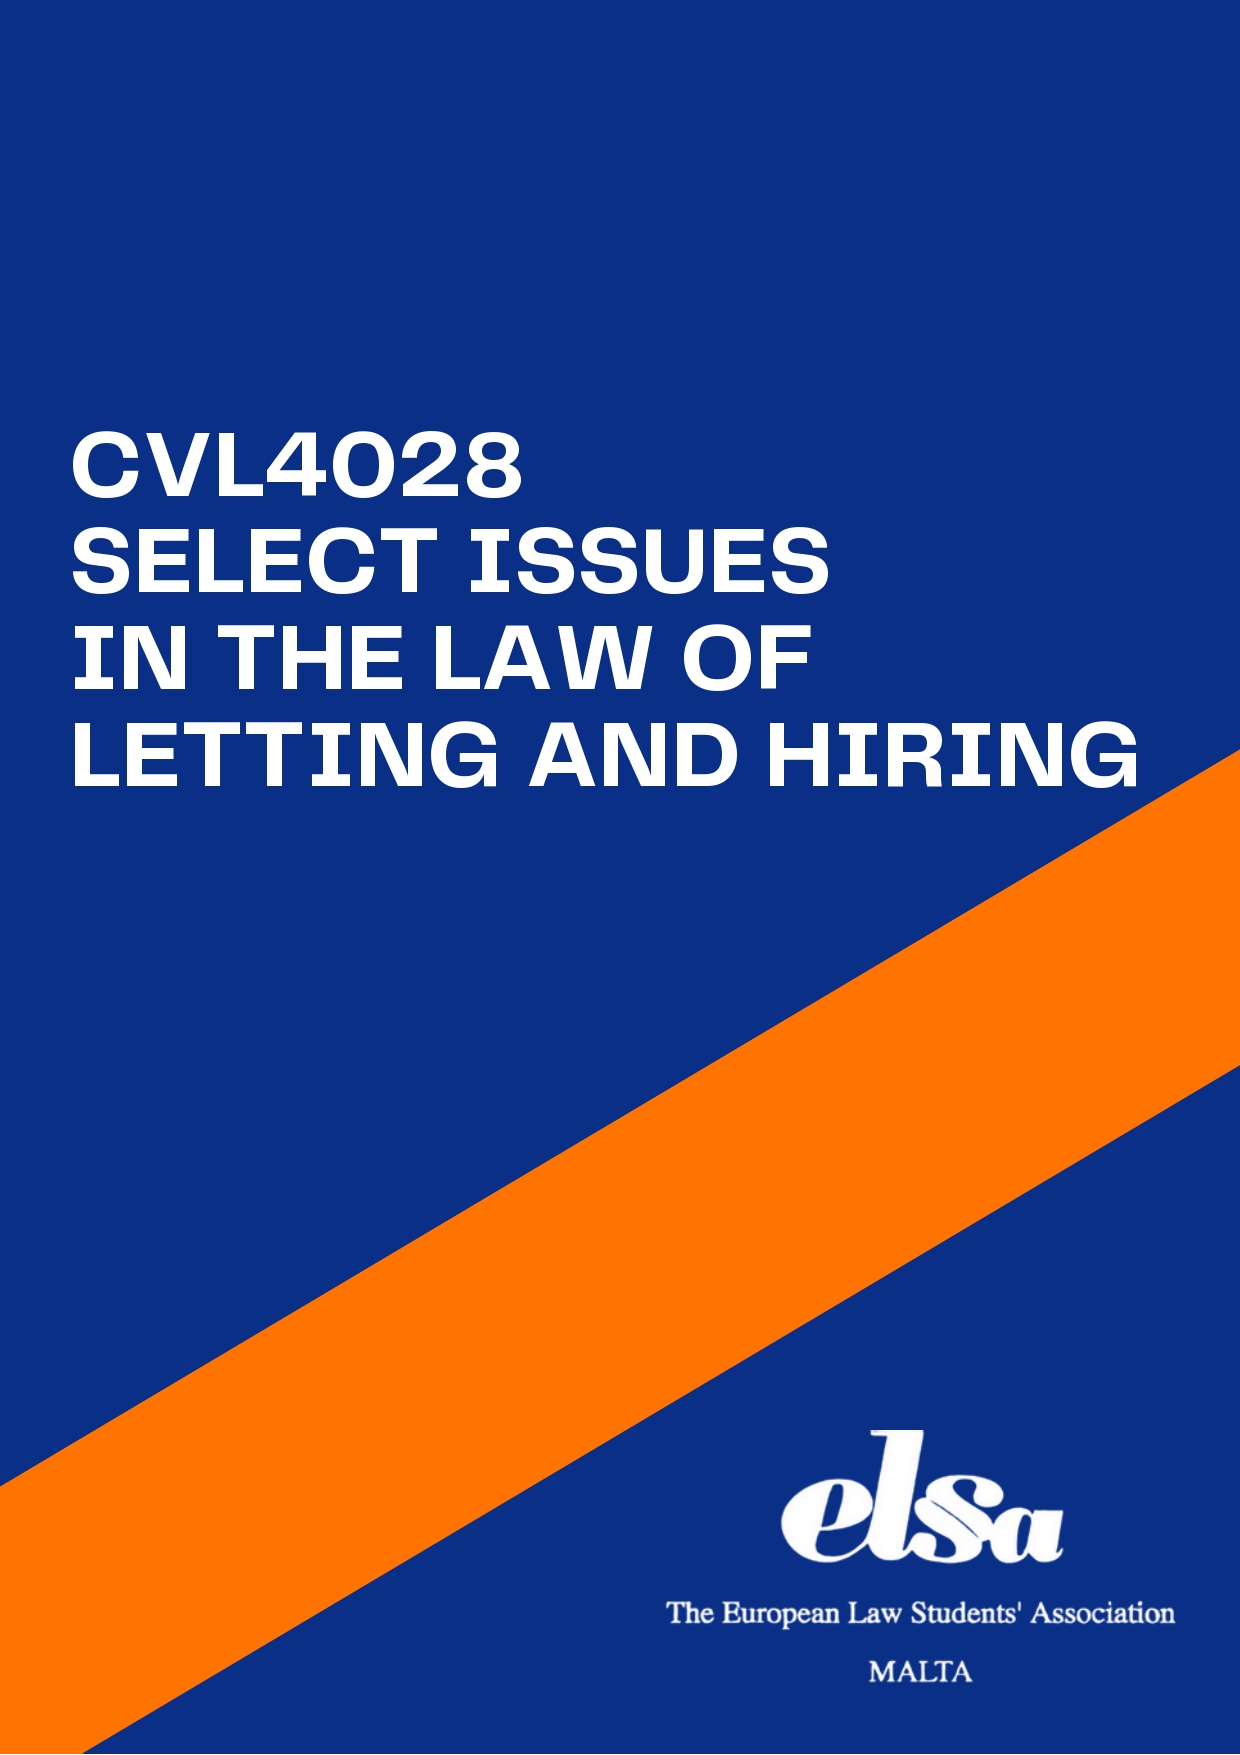 CVL4028 - Select Issues in the Law of Letting & Hiring